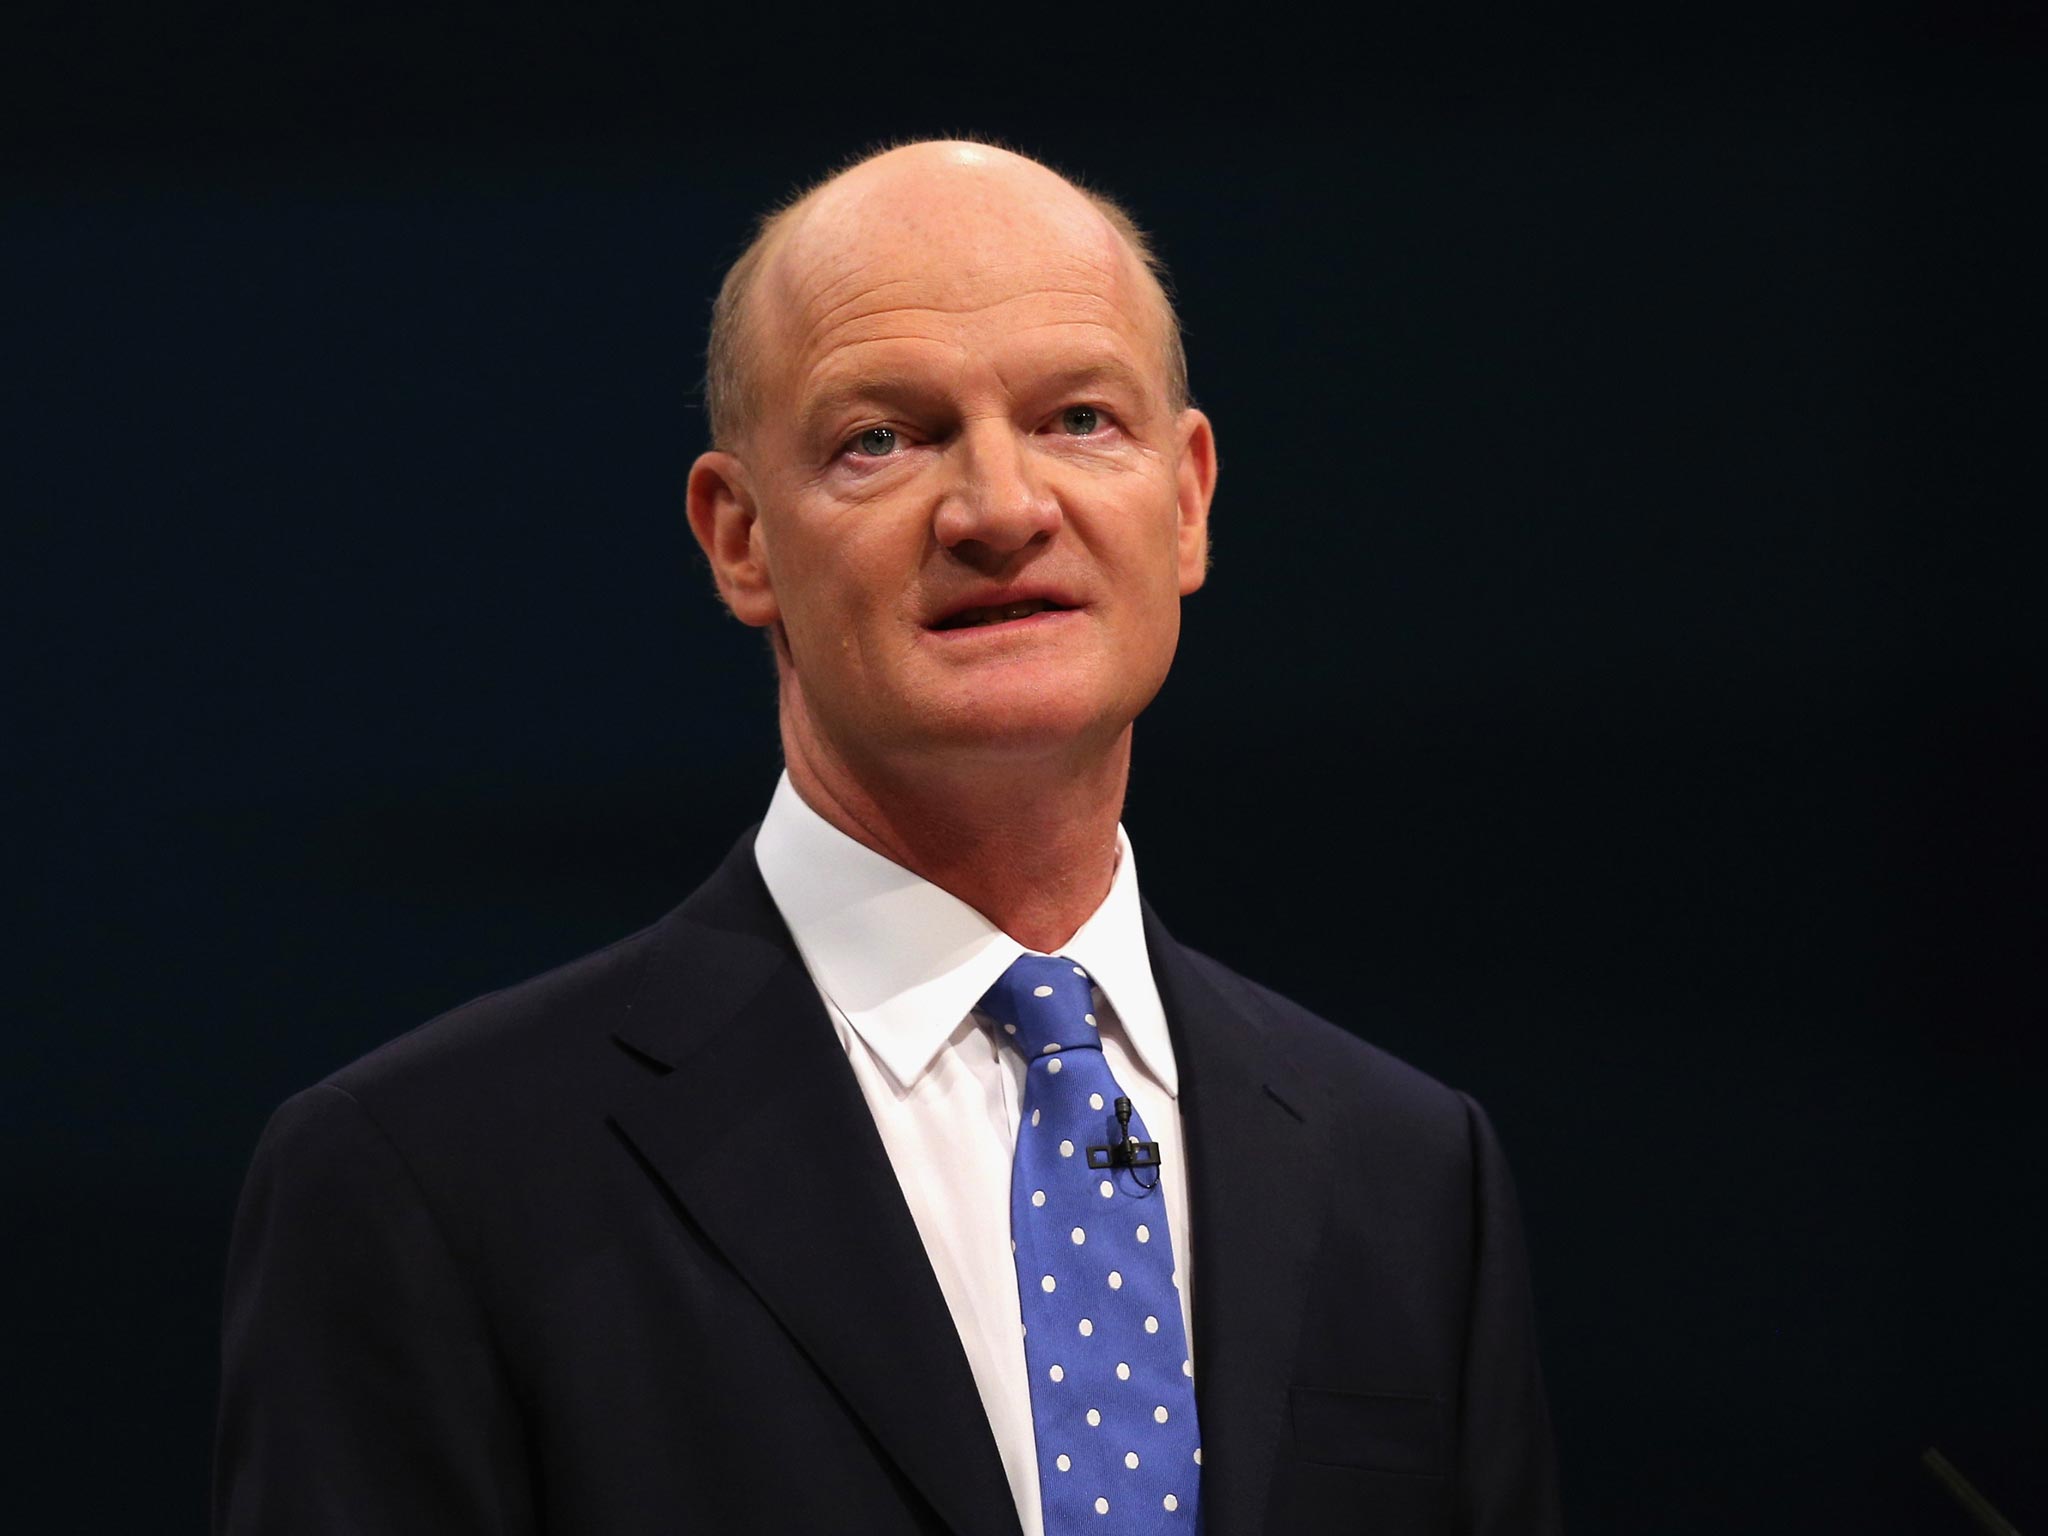 Universities Minister David Willetts (pictured) and Business Secretary Vince Cable said they were "concerned" about the salaries of top management at universities